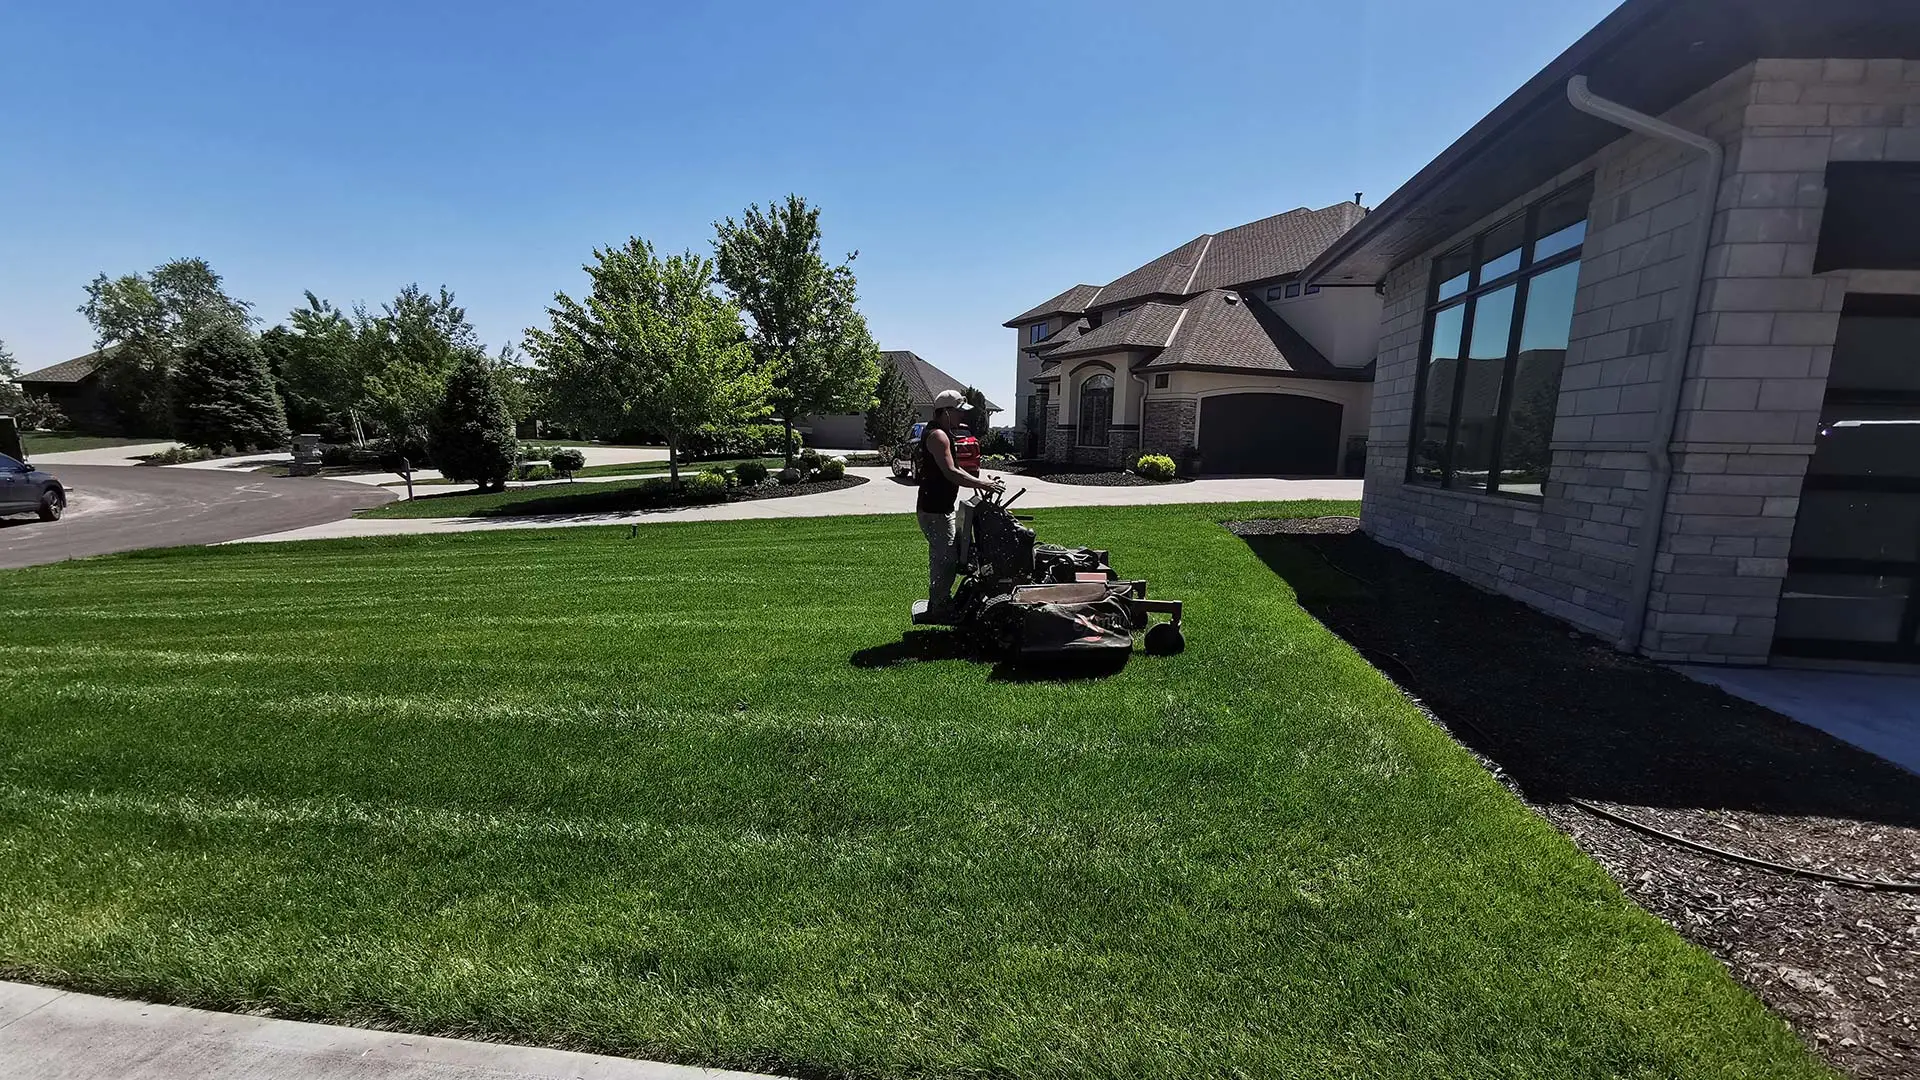 Our landscaper mowing a lawn in Omaha, NE.